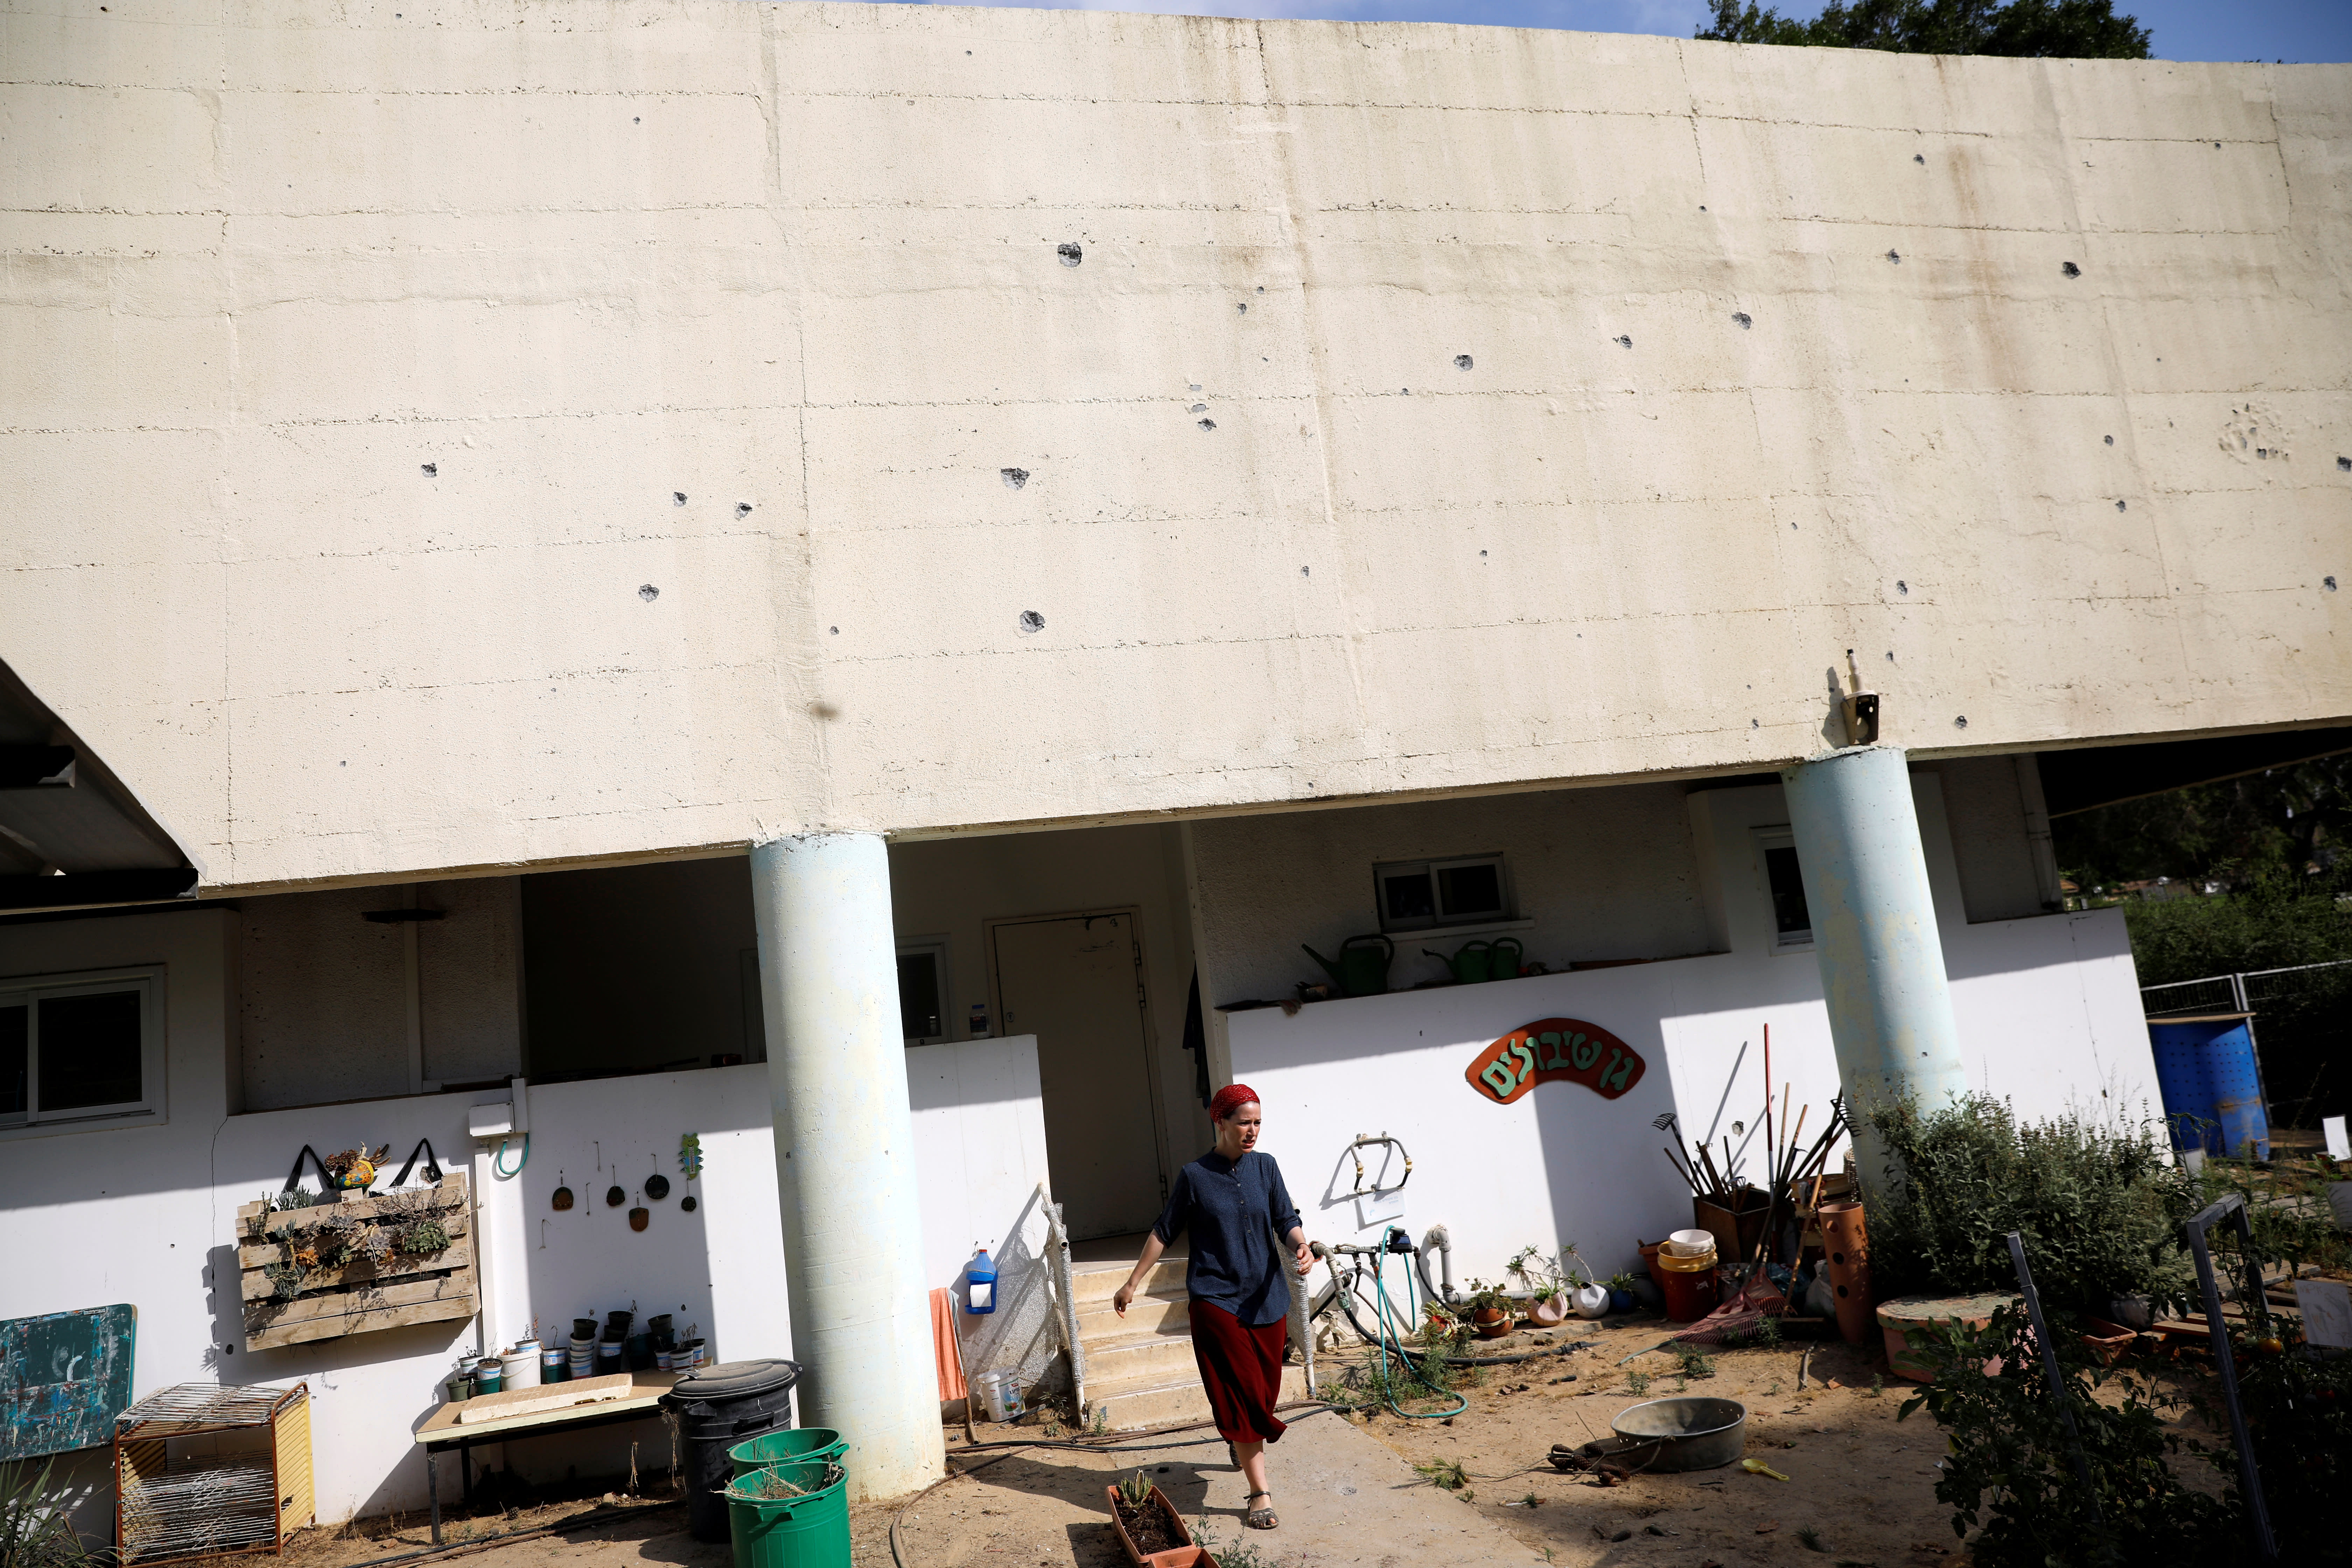 Damages caused by mortar shells fired from the Gaza Strip that landed near a kindergarten can be seen on its wall, in a Kibbutz on the Israeli side of the Israeli-Gaza border May 29, 2018 (Reuters)